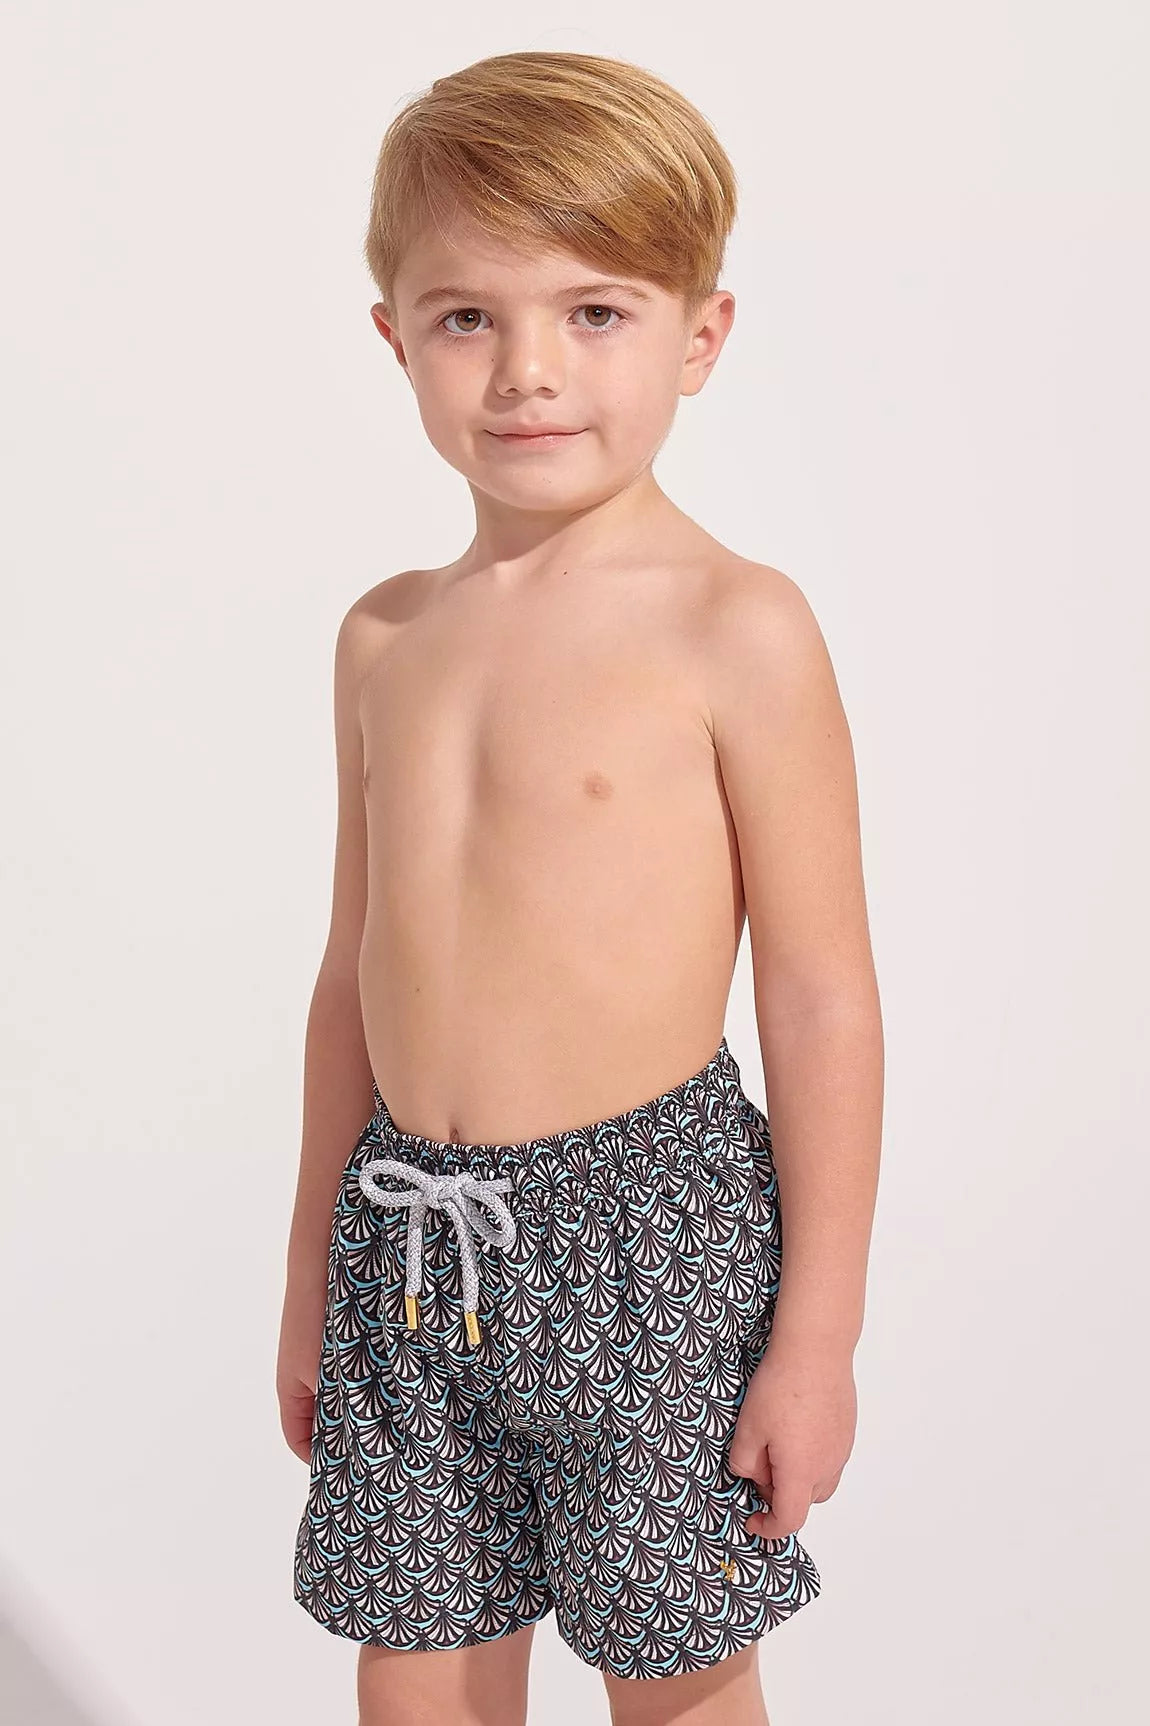 The Illustrated Shell Boy Trunk - ANCORA